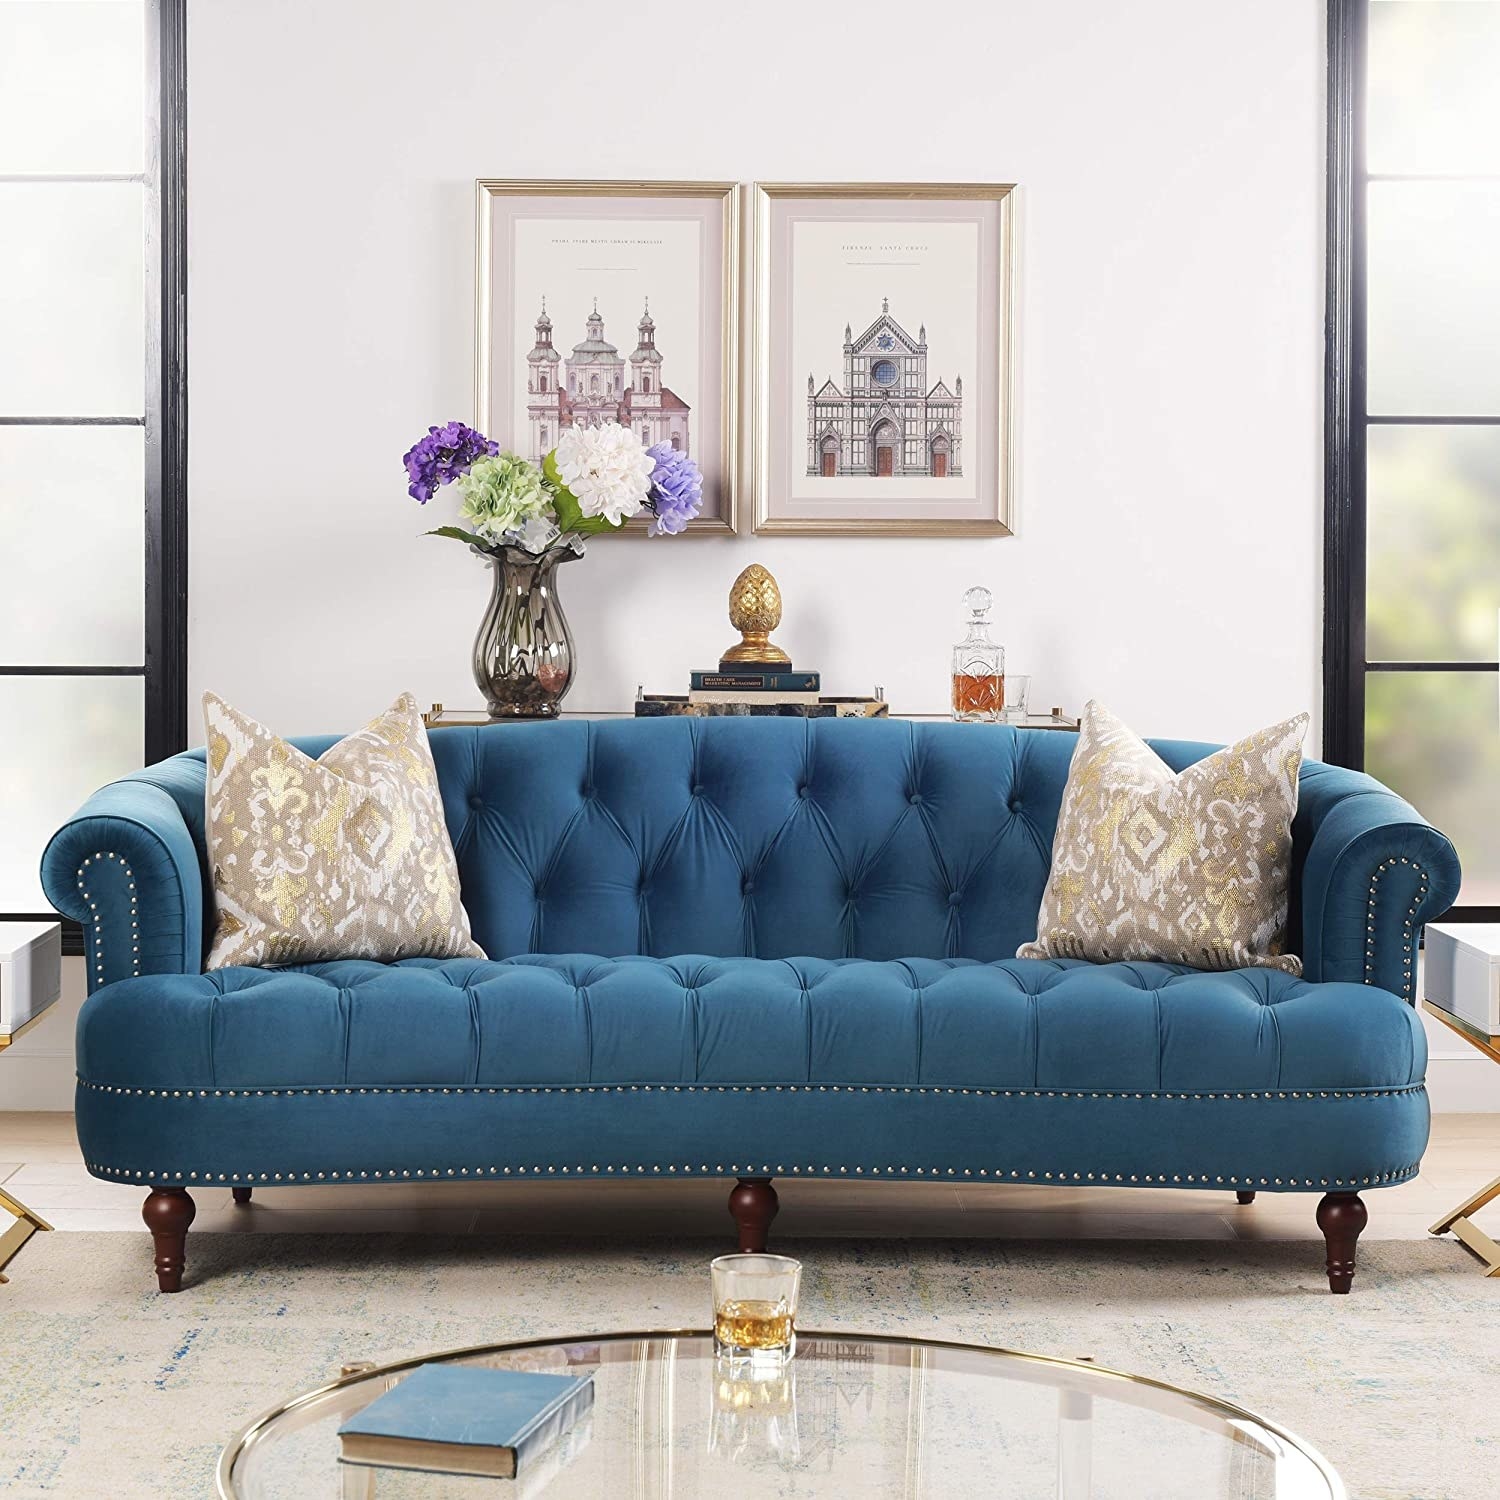 The sofa in the color Satin Teal